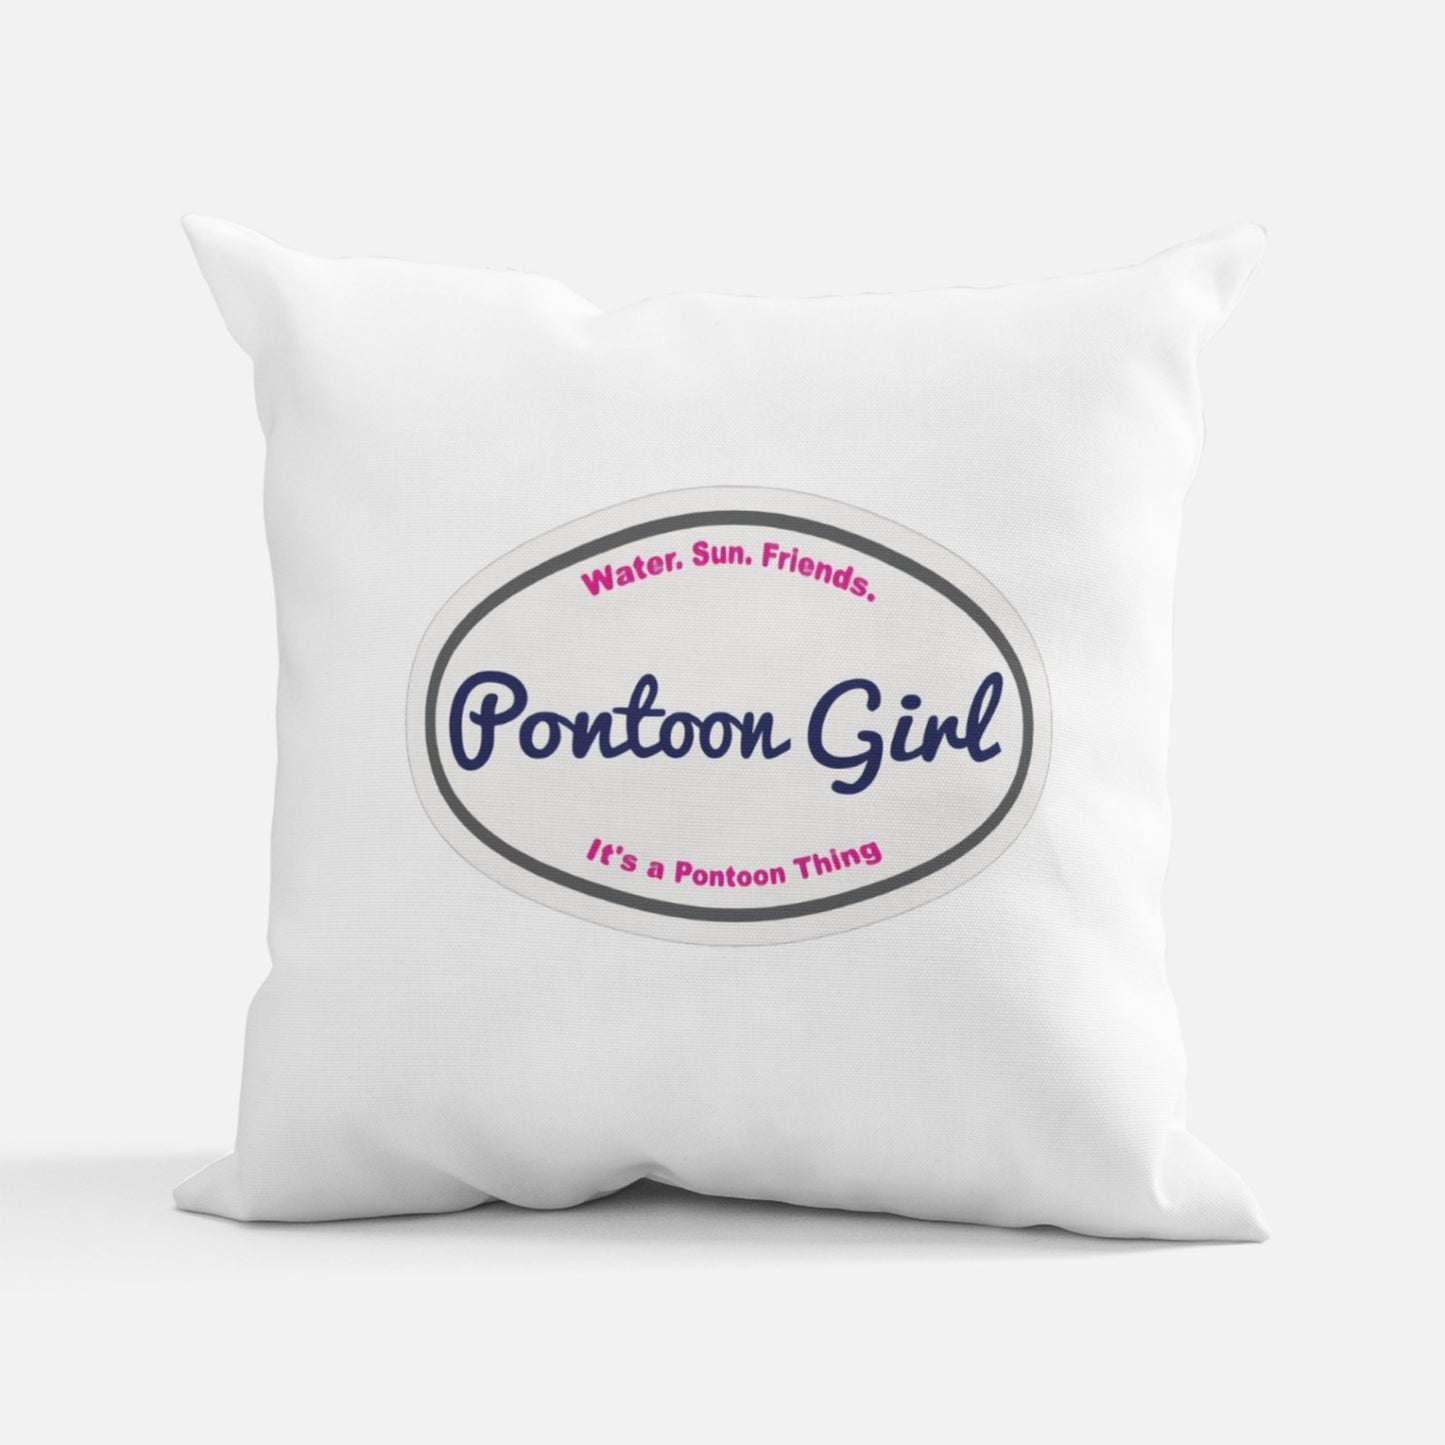 2022 Sweet Cyber Special from Pontoon Girl®